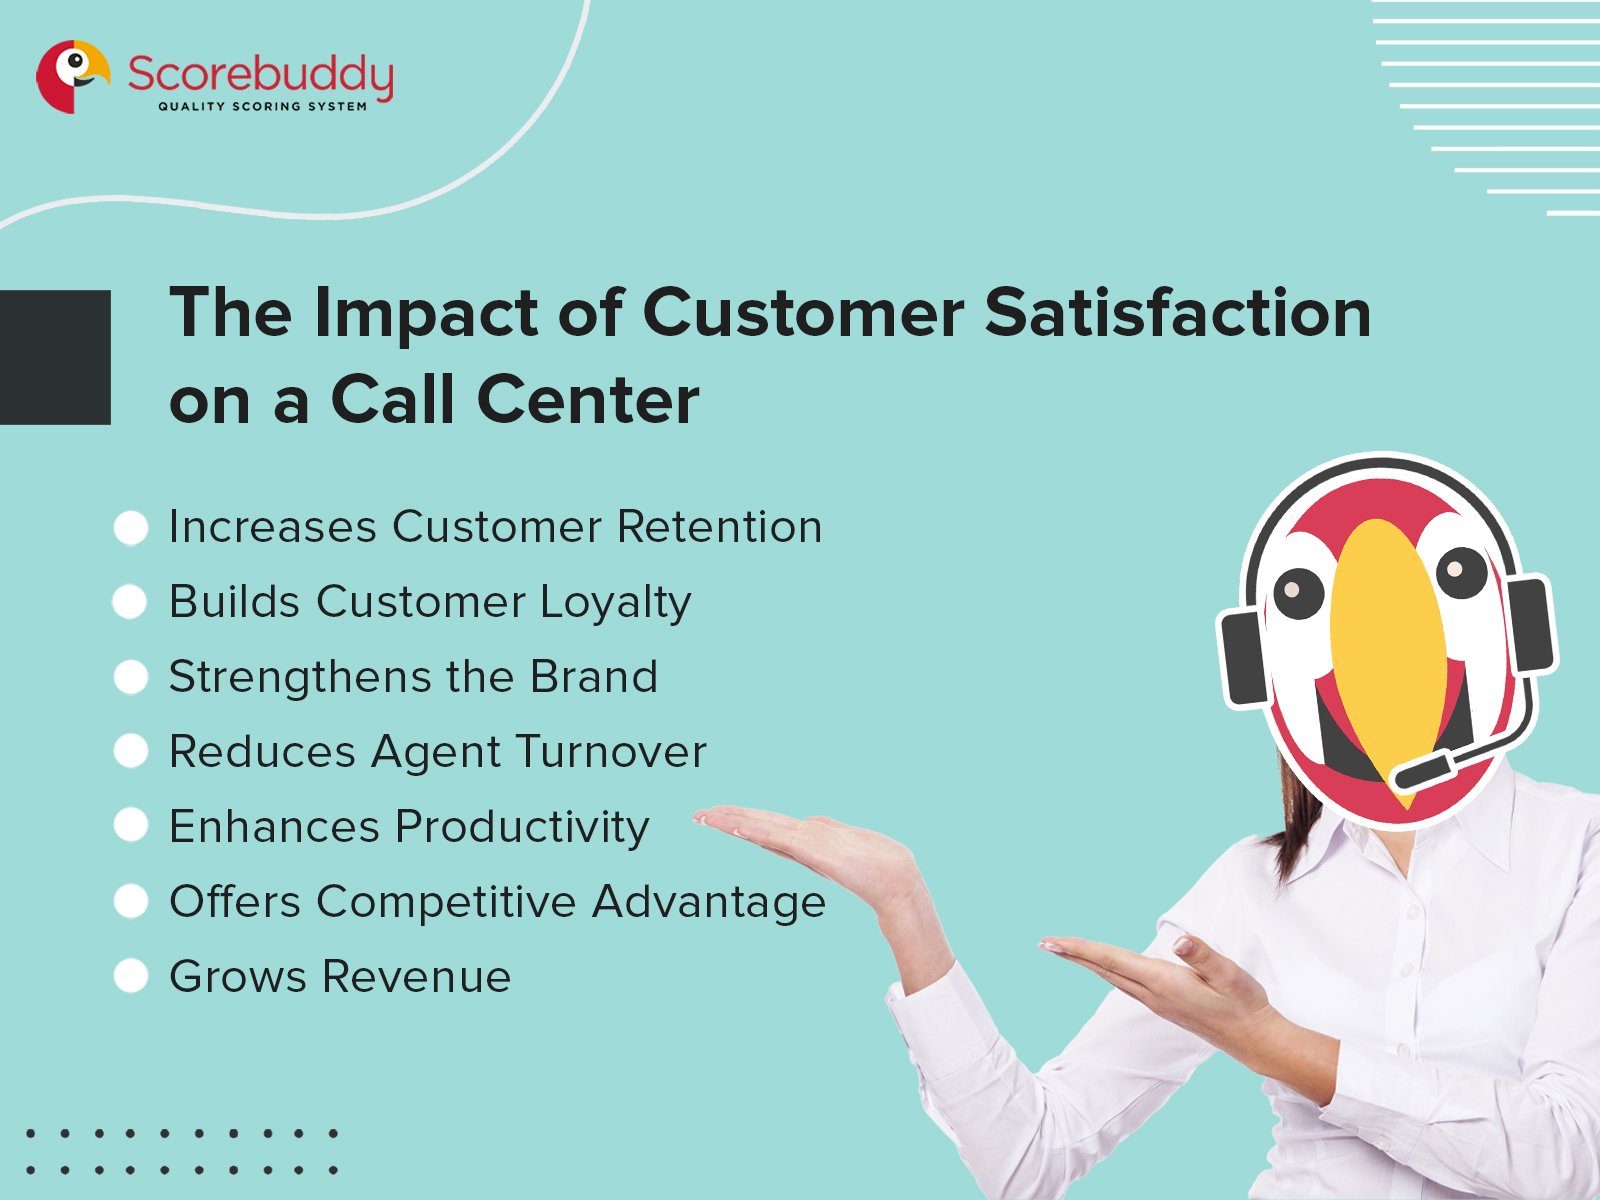 The Impact of Customer Satisfaction on a Call Center